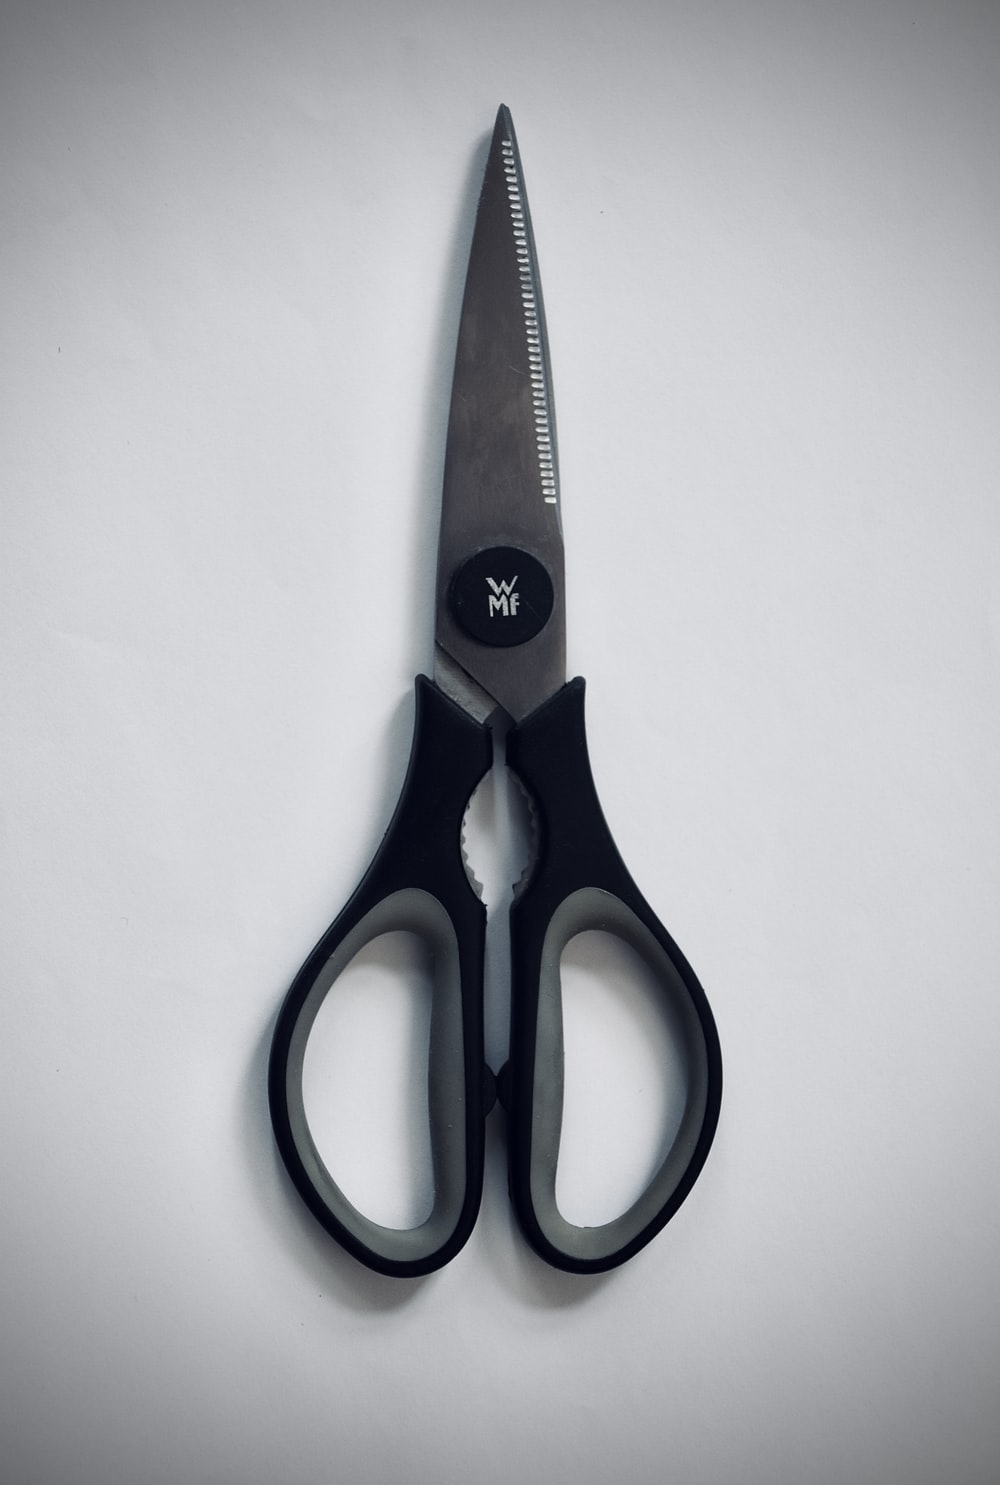 Detail Picture Of A Scissors Nomer 10